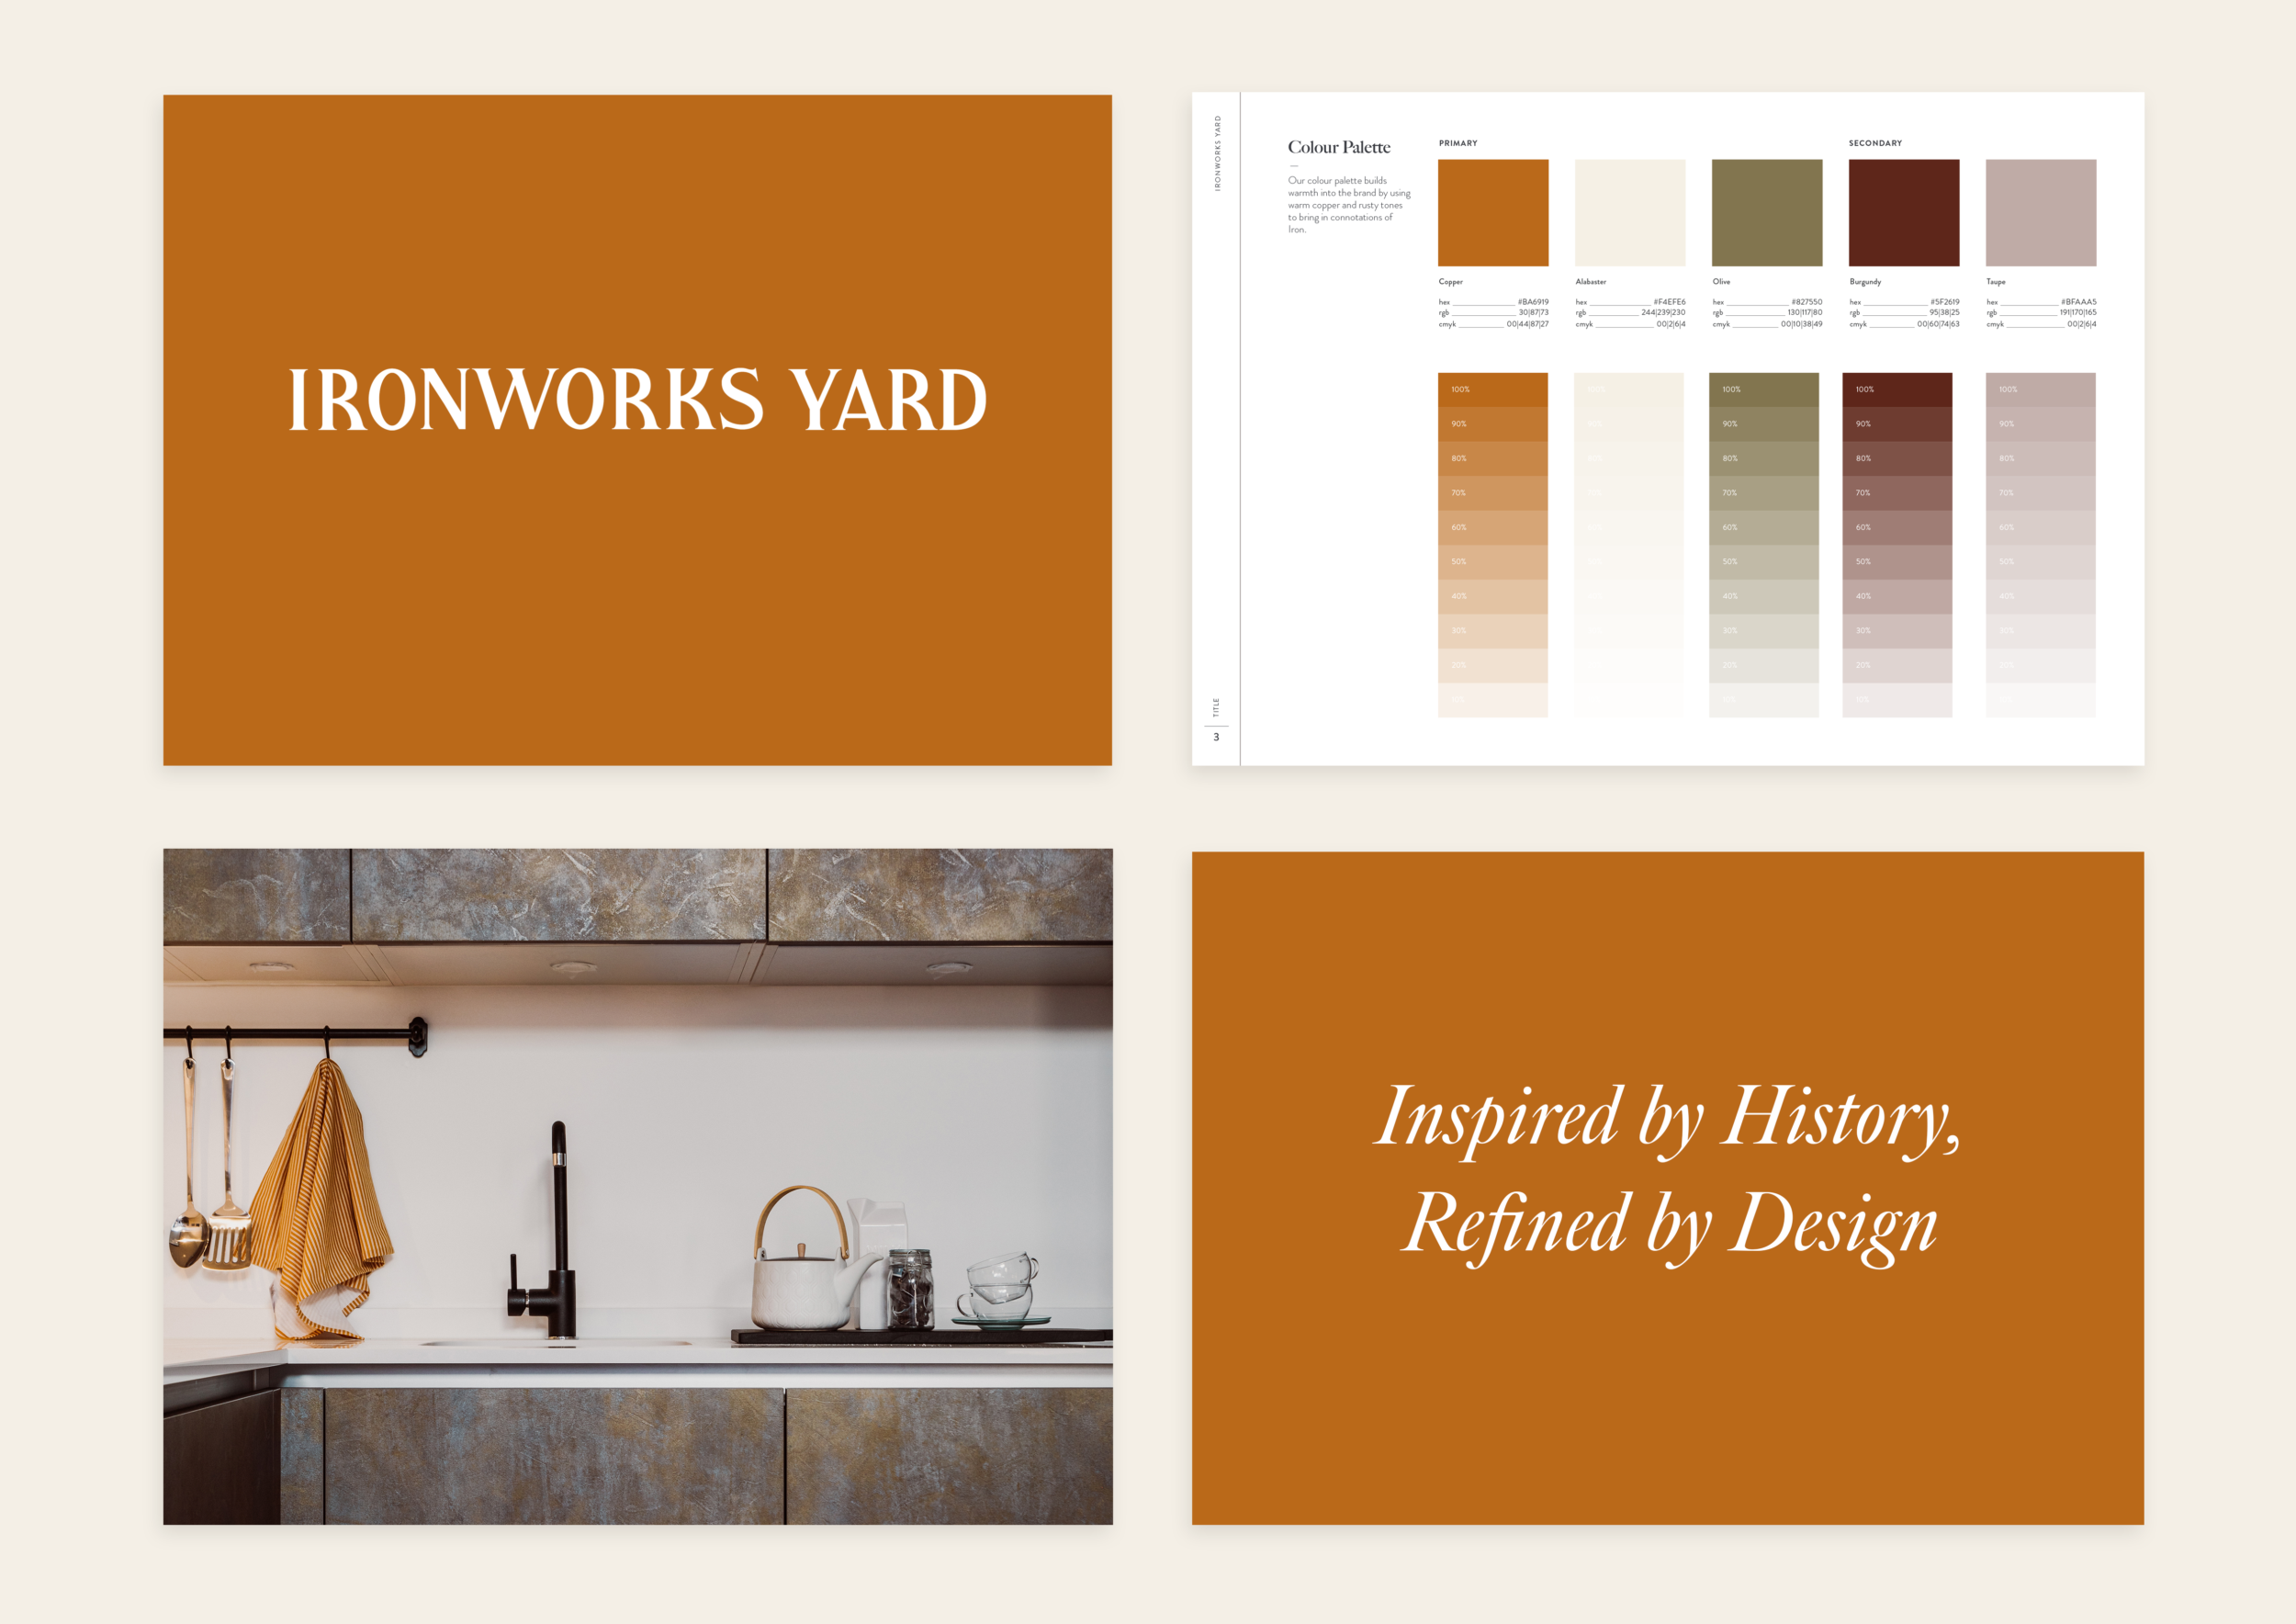 Brand guidelines for the Ironworks Yard development including logo, colour palette, slogan and imagery.